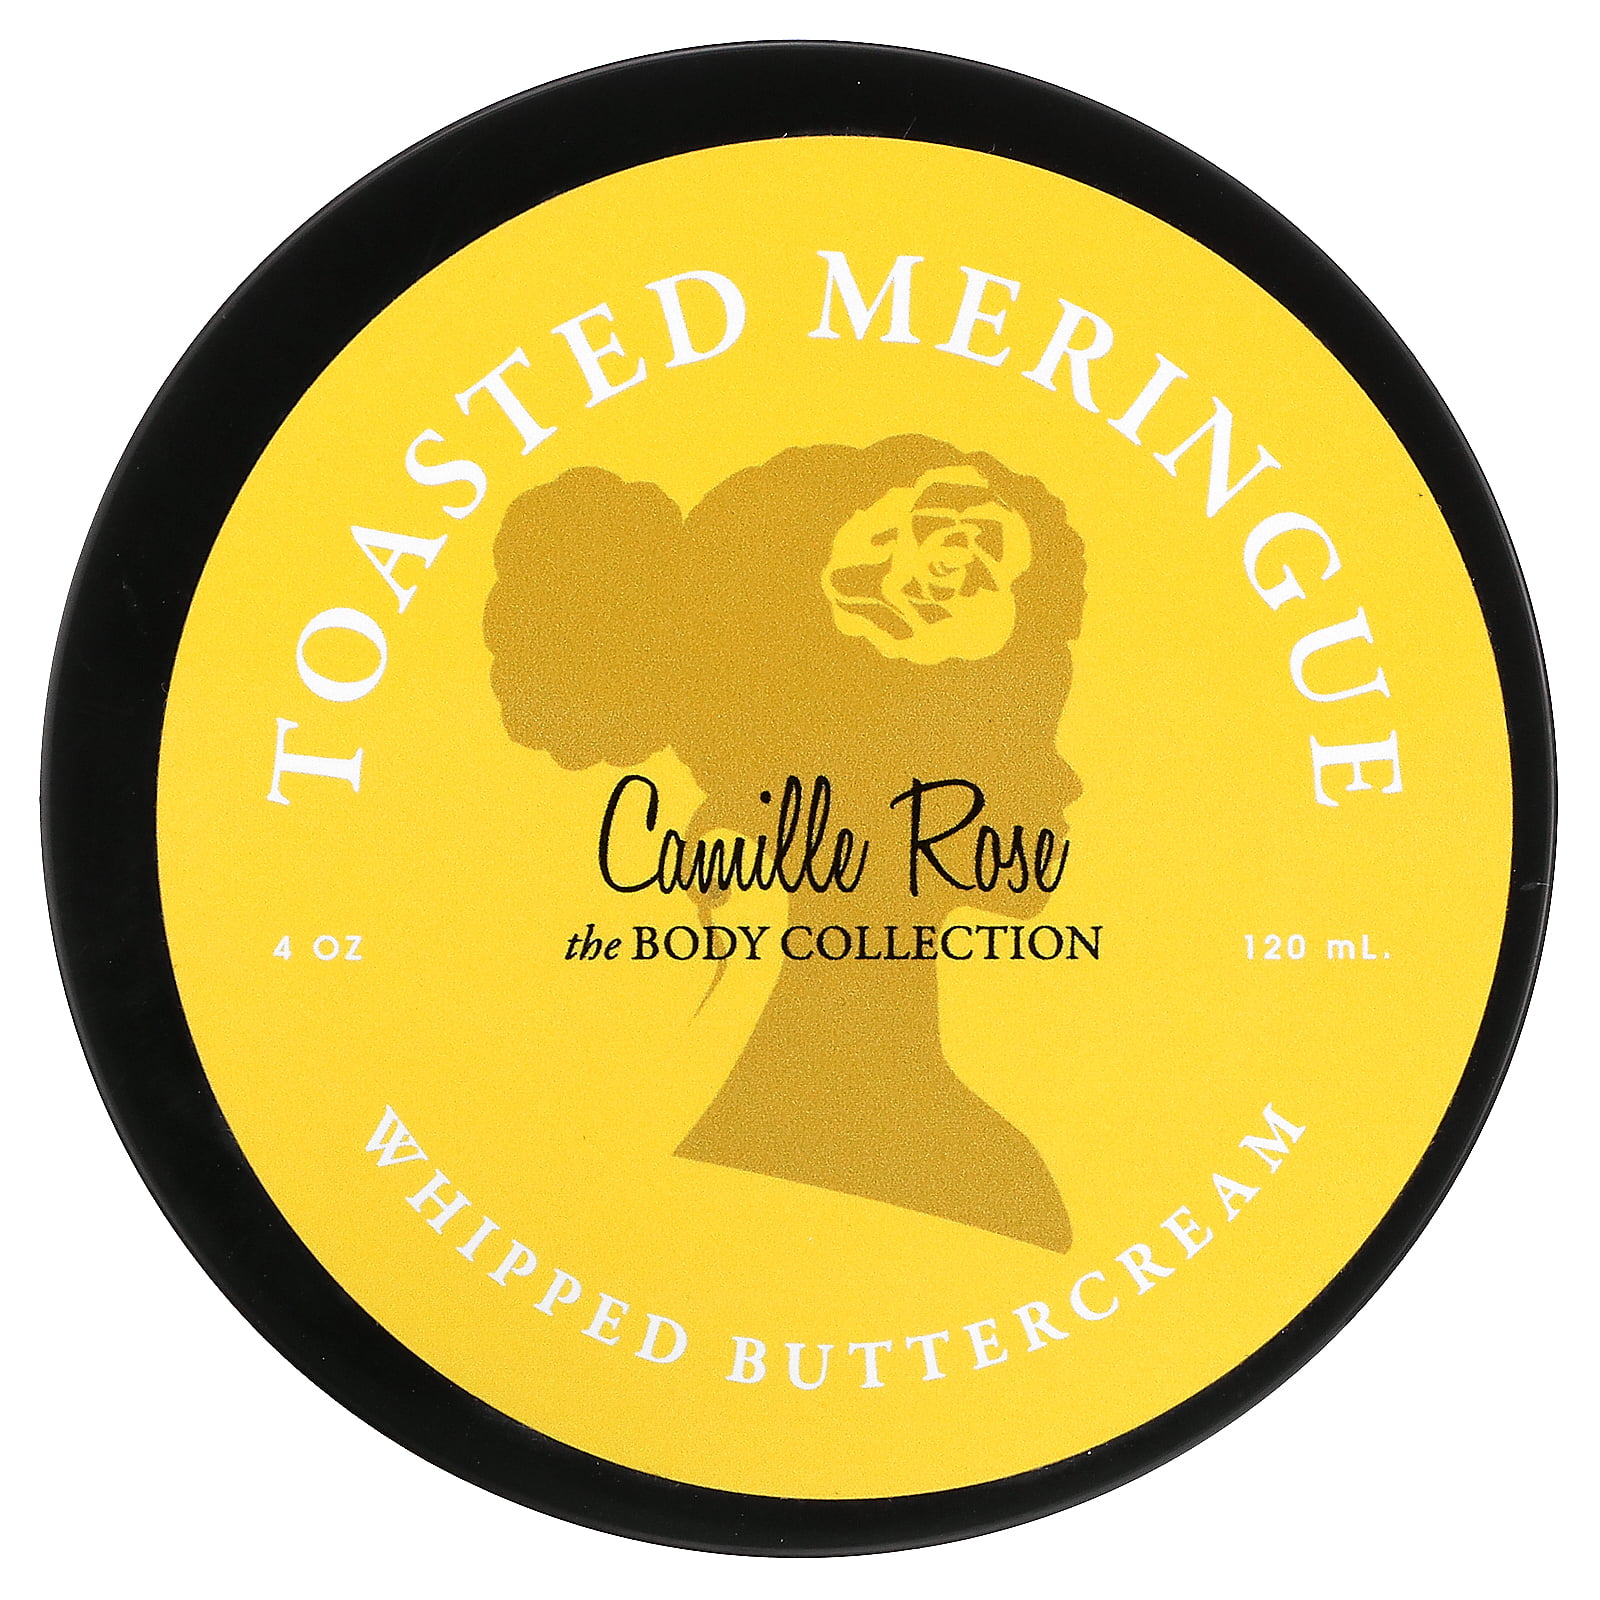 Camille Rose Whipped Buttercream, Toasted Meringue, 4 oz (120 ml 